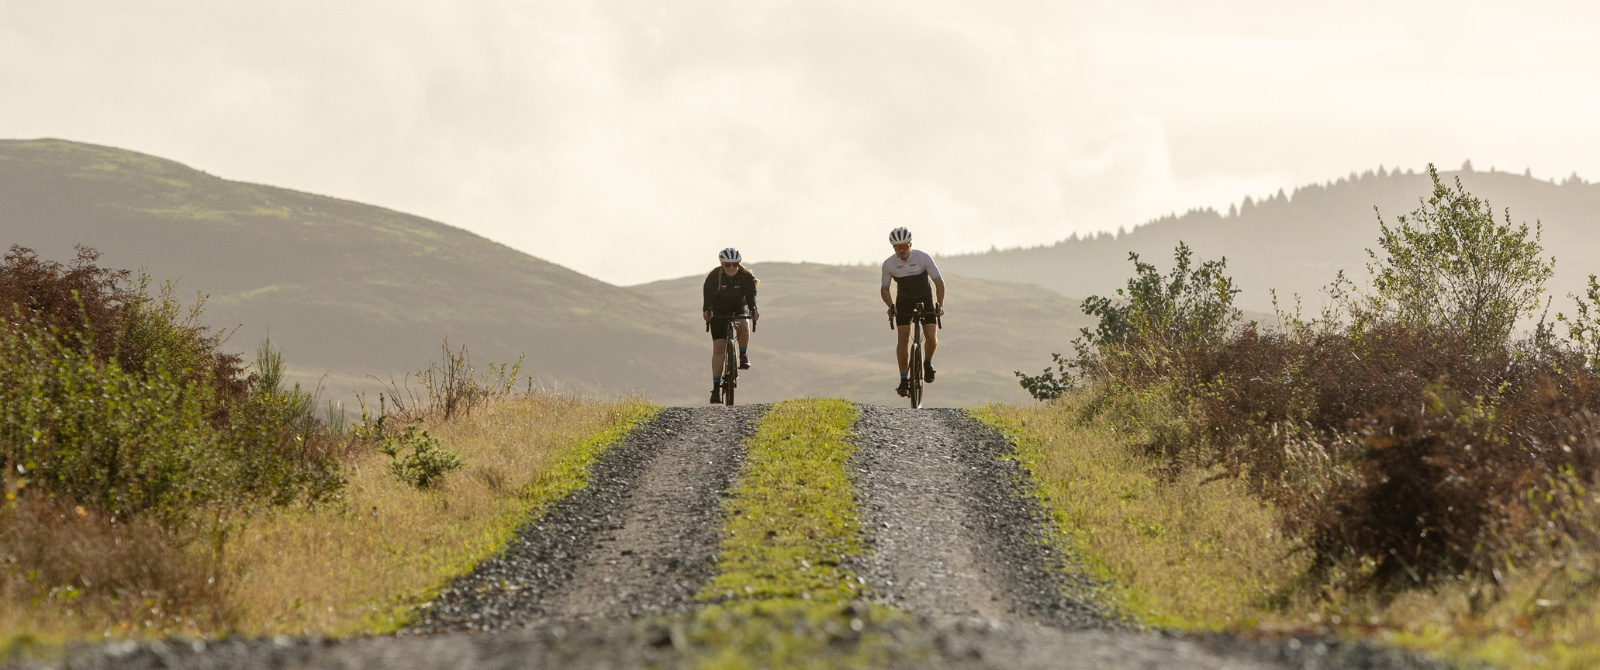 Two cyclists on a gravel roadway with hills in the background